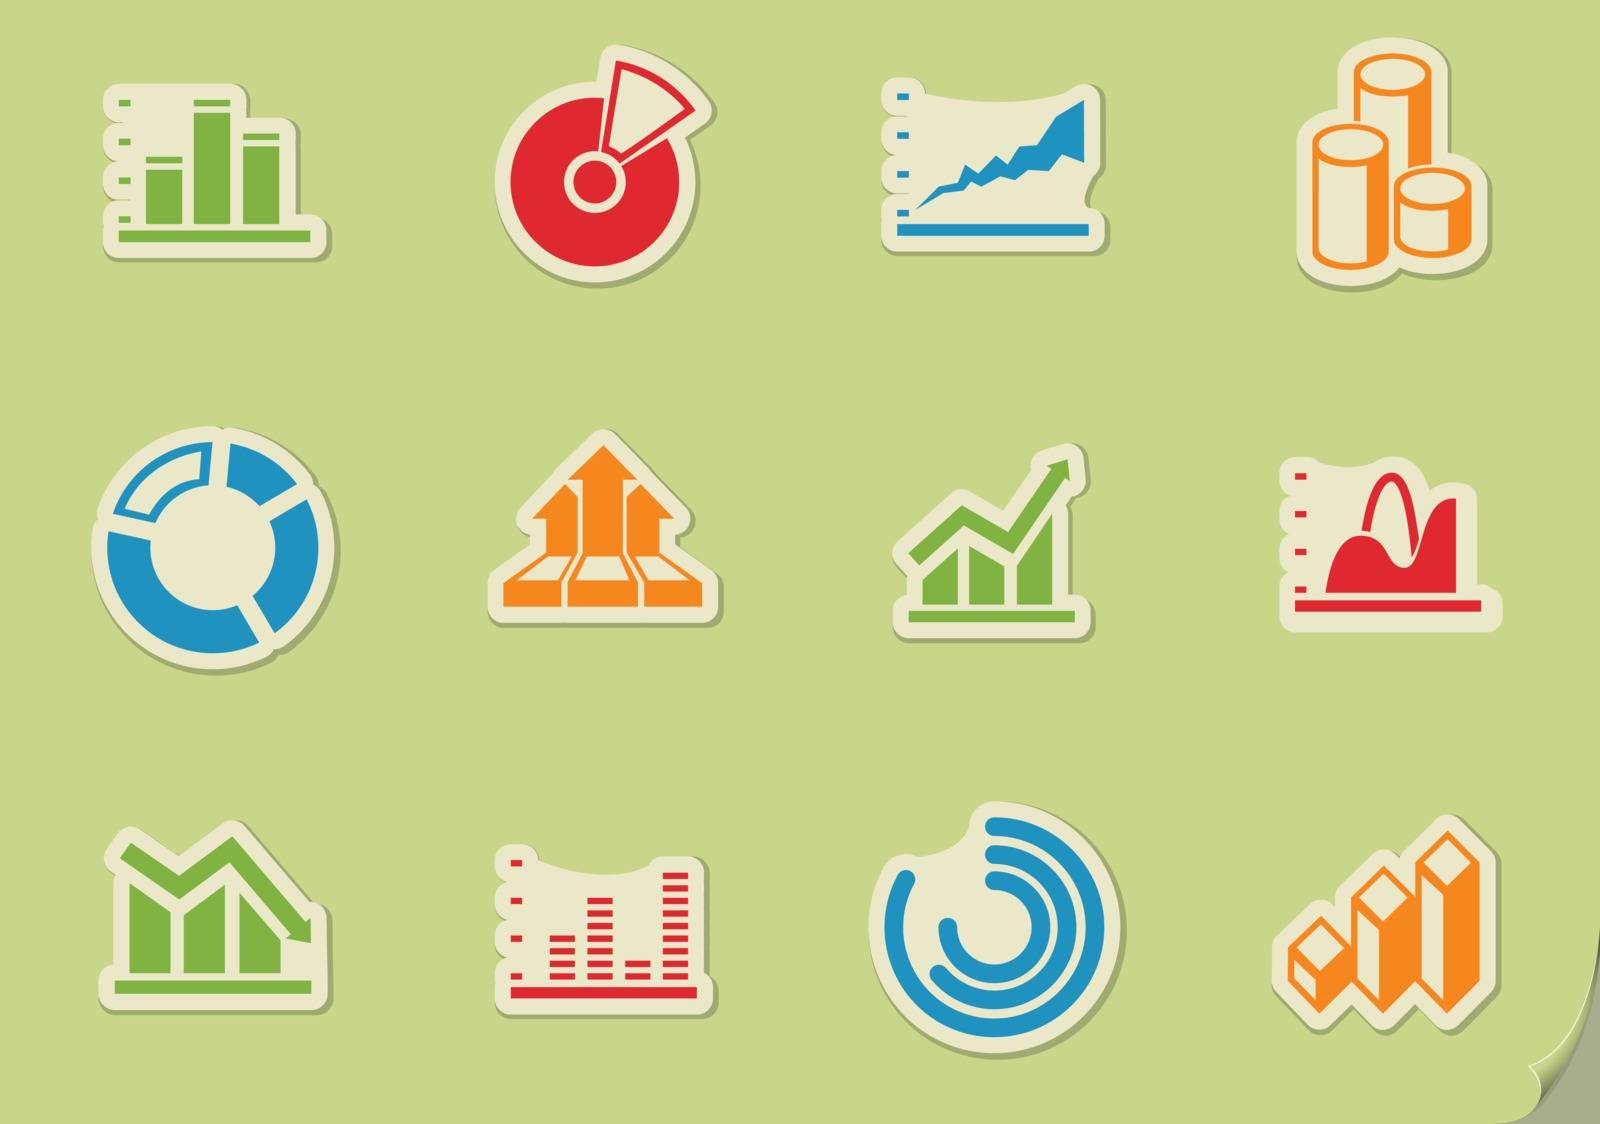 Diagram and infographic icons by ayax